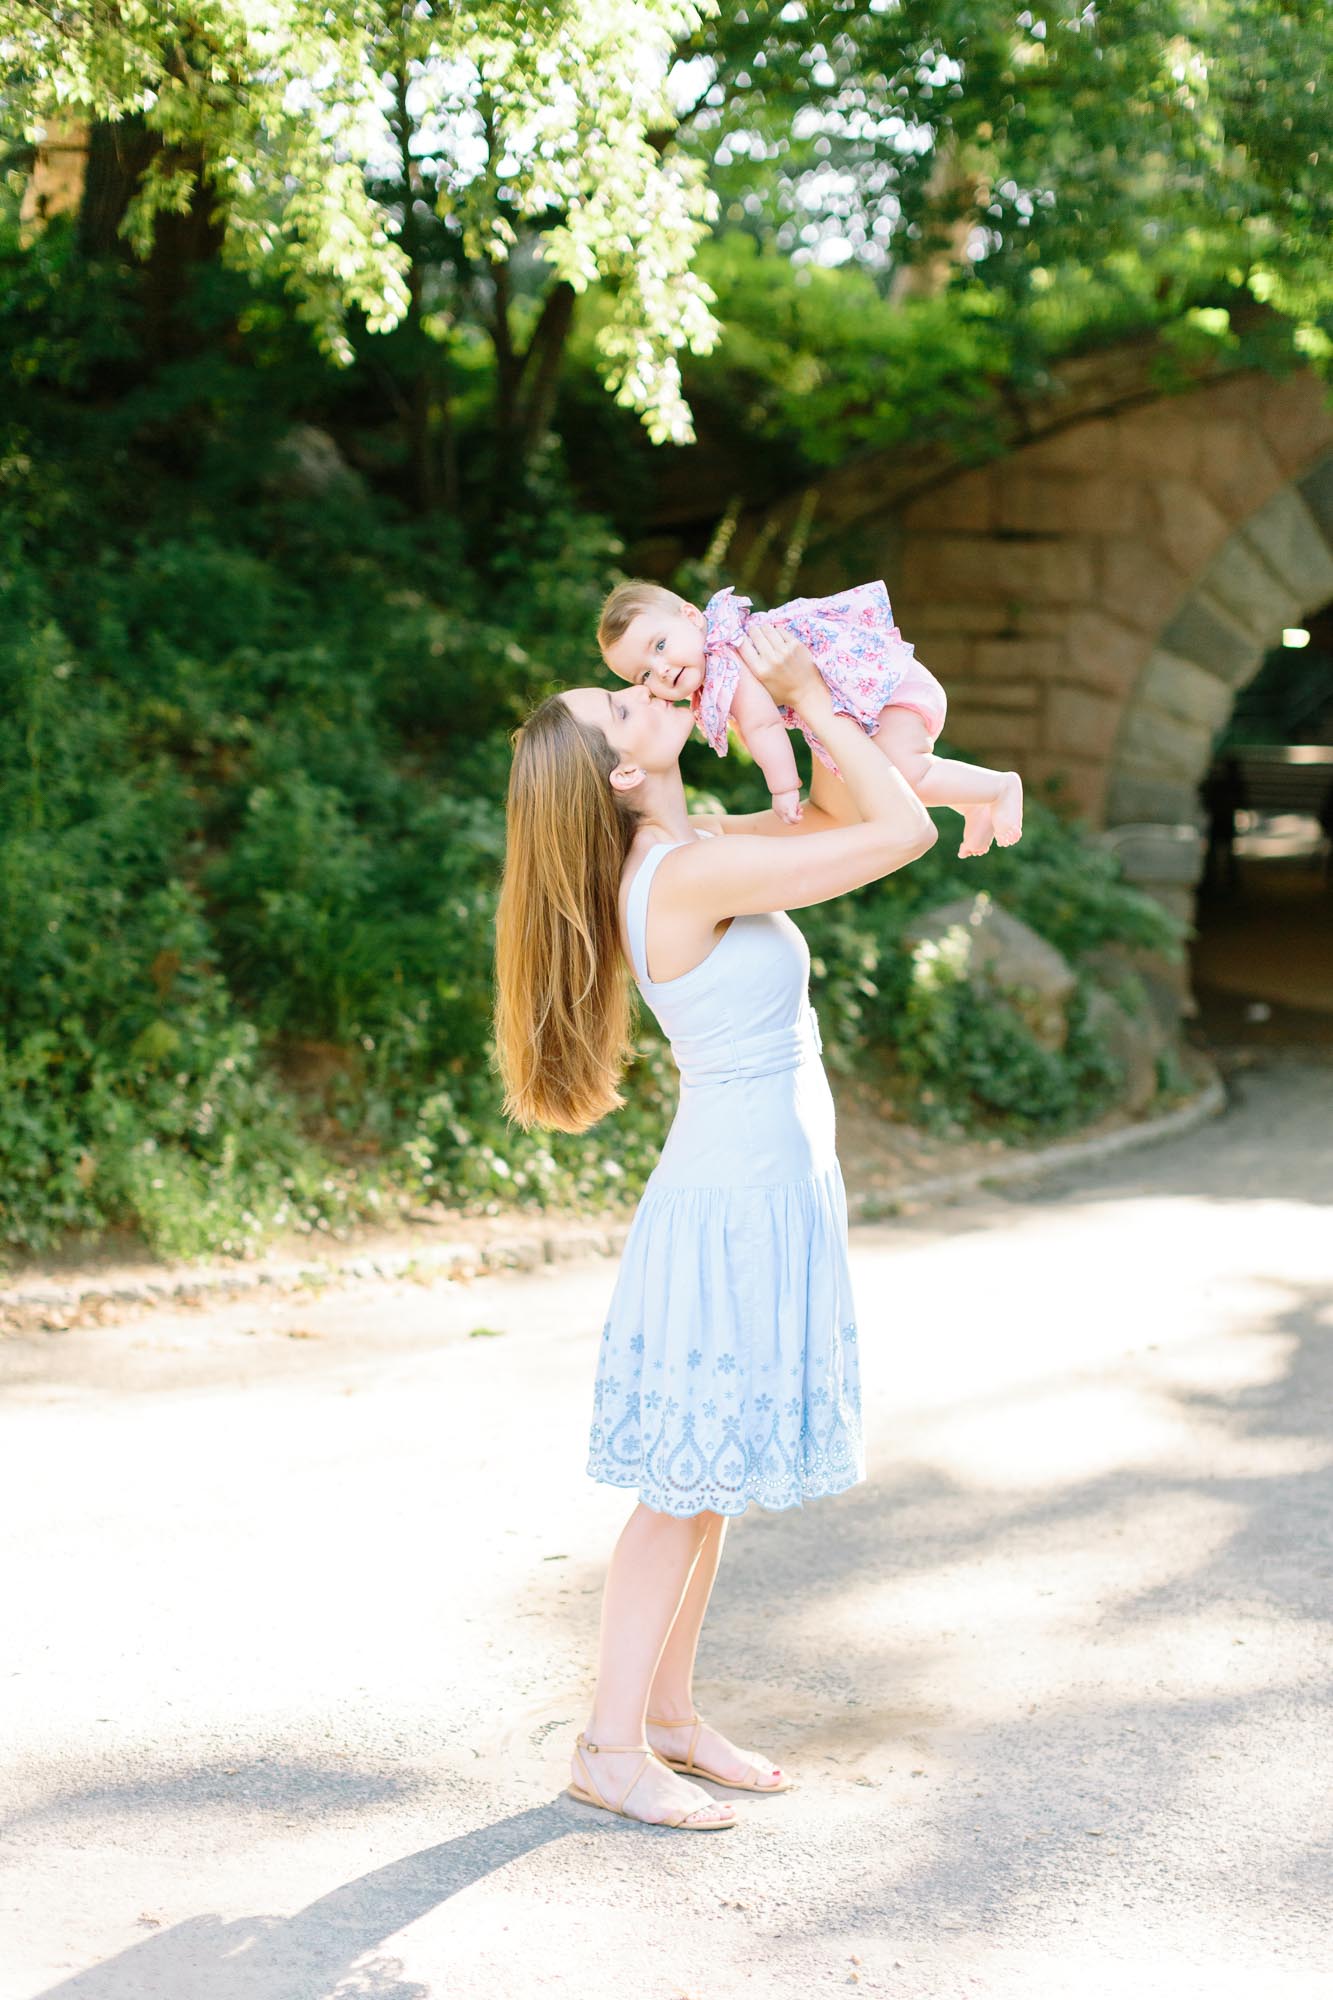 Morillos family in Central Park pictured by top NYC family photographer, Jacqueline Clair